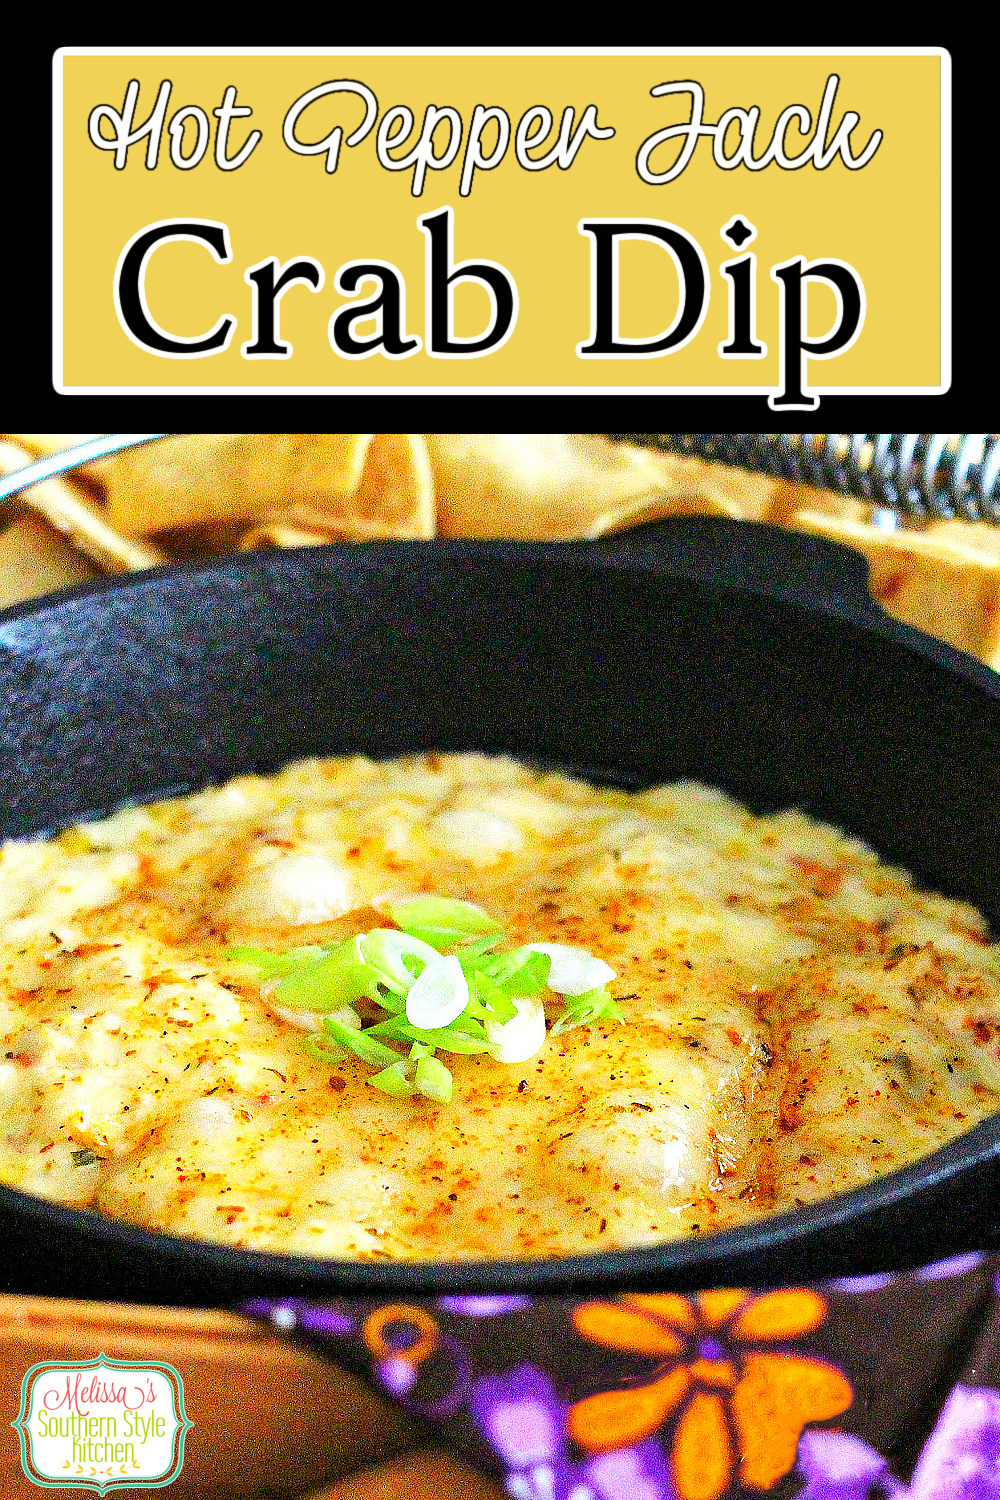 This Hot Pepper Jack Crab Dip is ready to go with pita chips, crackers or crostini for dipping #crabdip #hotcrabdip #bakedcrabdip #pepperjackcheese #appetizers #partyfood #footballfood #holidayrecipes #seafooddip #seafood #jumbolumpcrab #tailgating #southernfood #southernrecipes via @melissasssk